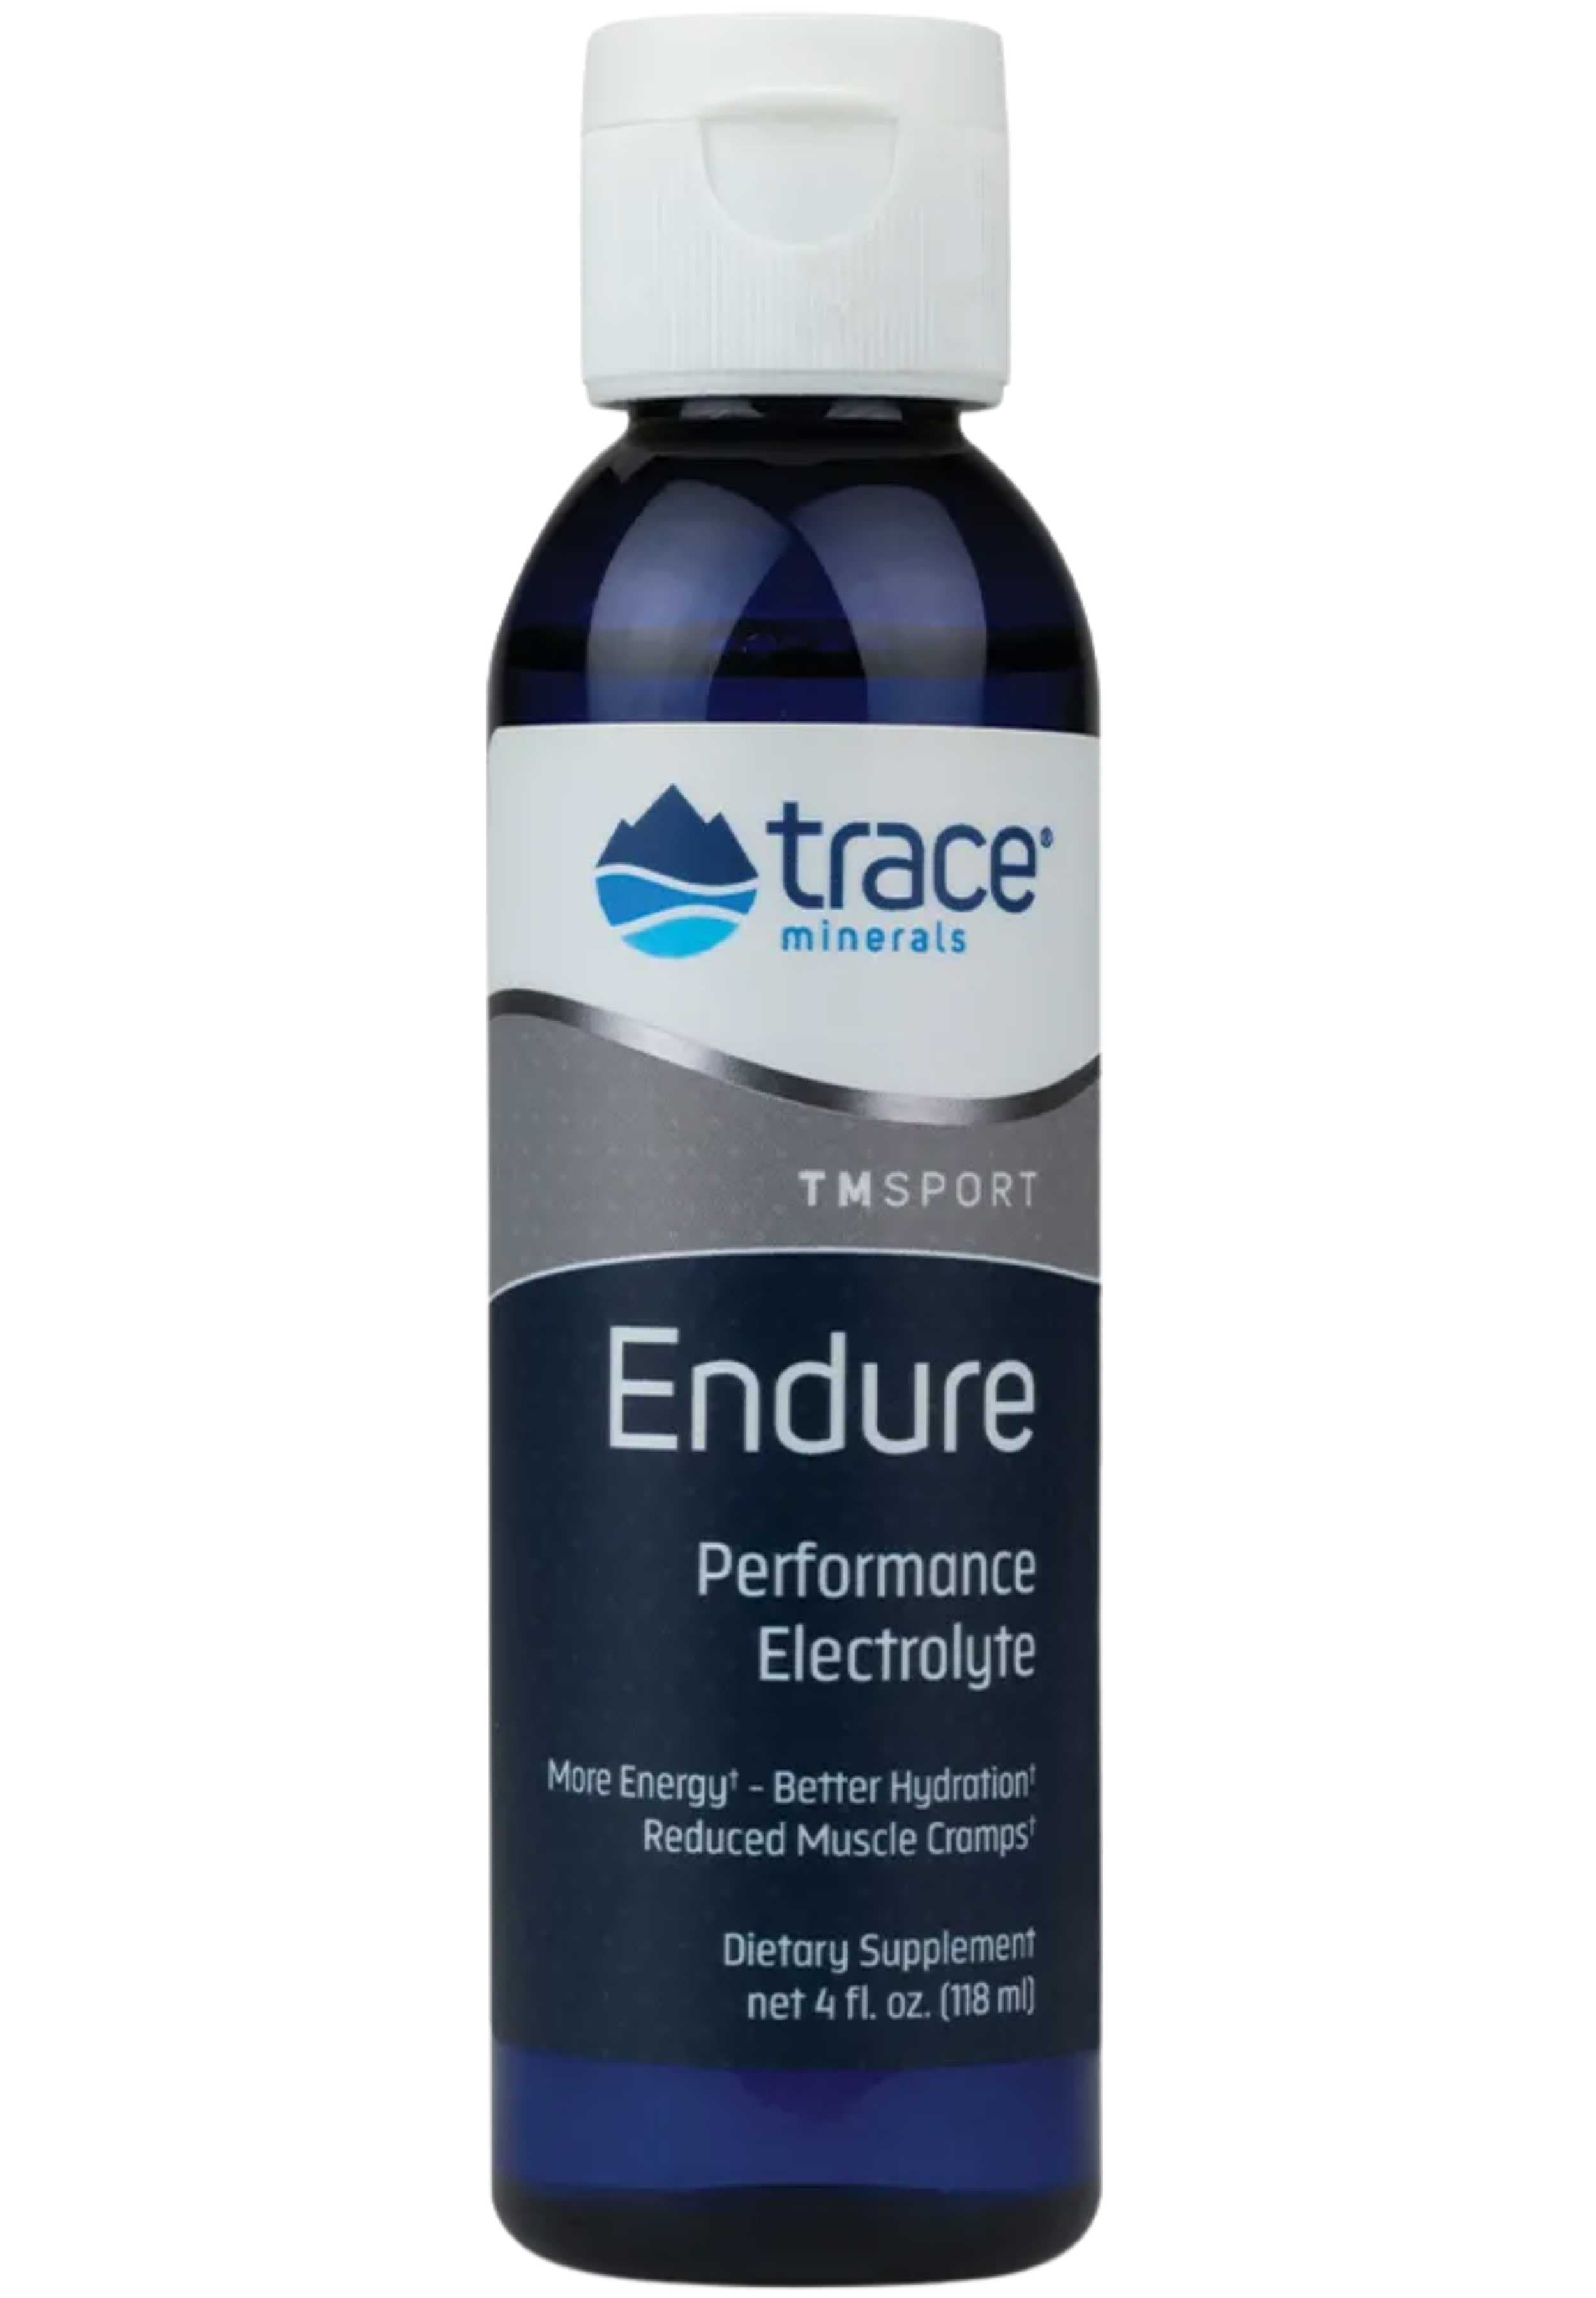 Trace Minerals Research Endure